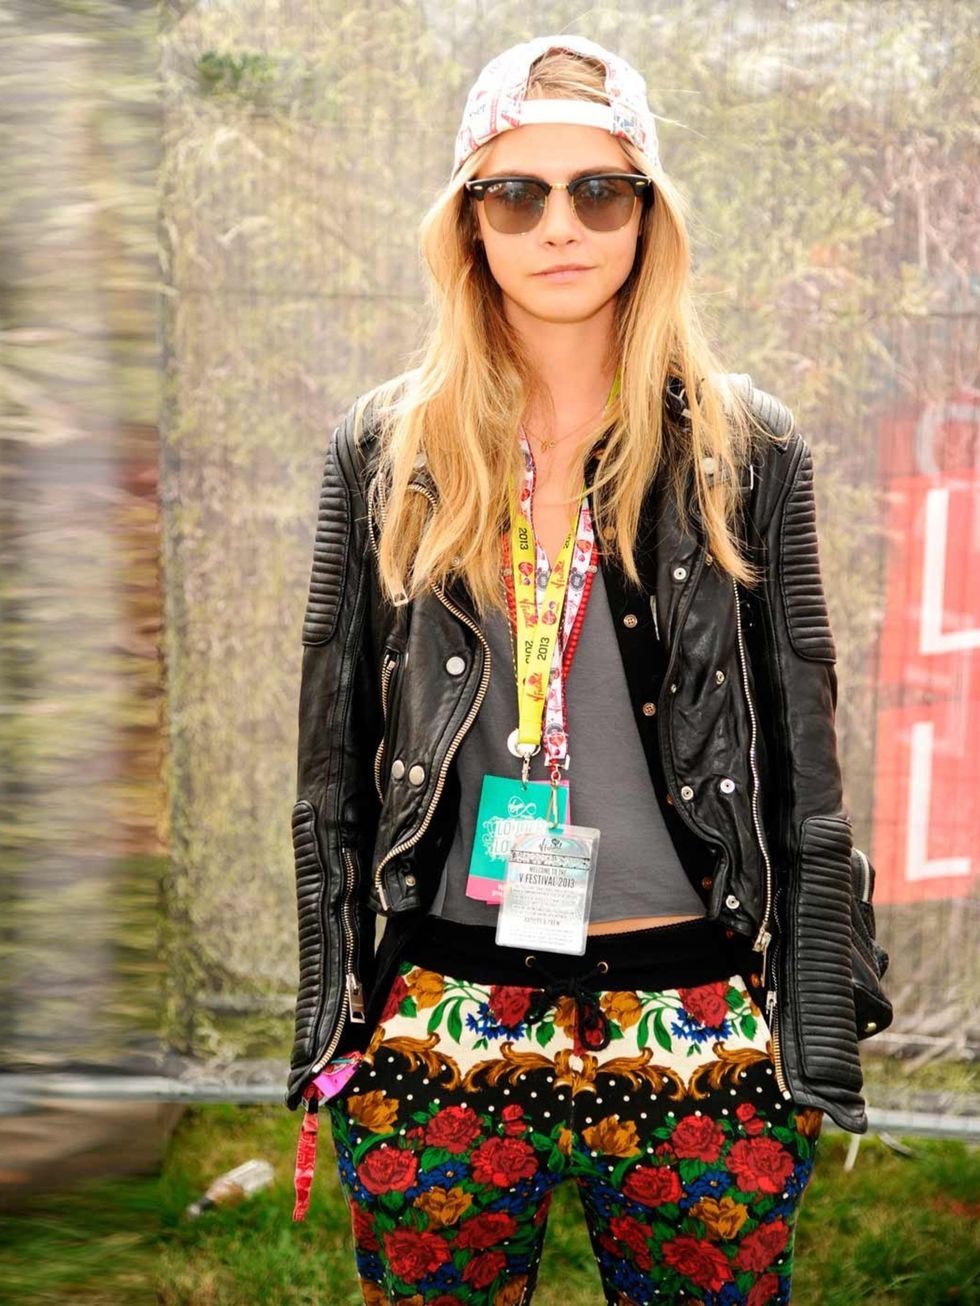 <p>Cara Delevingne in <a href="http://www.elleuk.com/fashion/what-to-wear/burgundy">Minkpink</a> at the V festival, August 2013.</p>